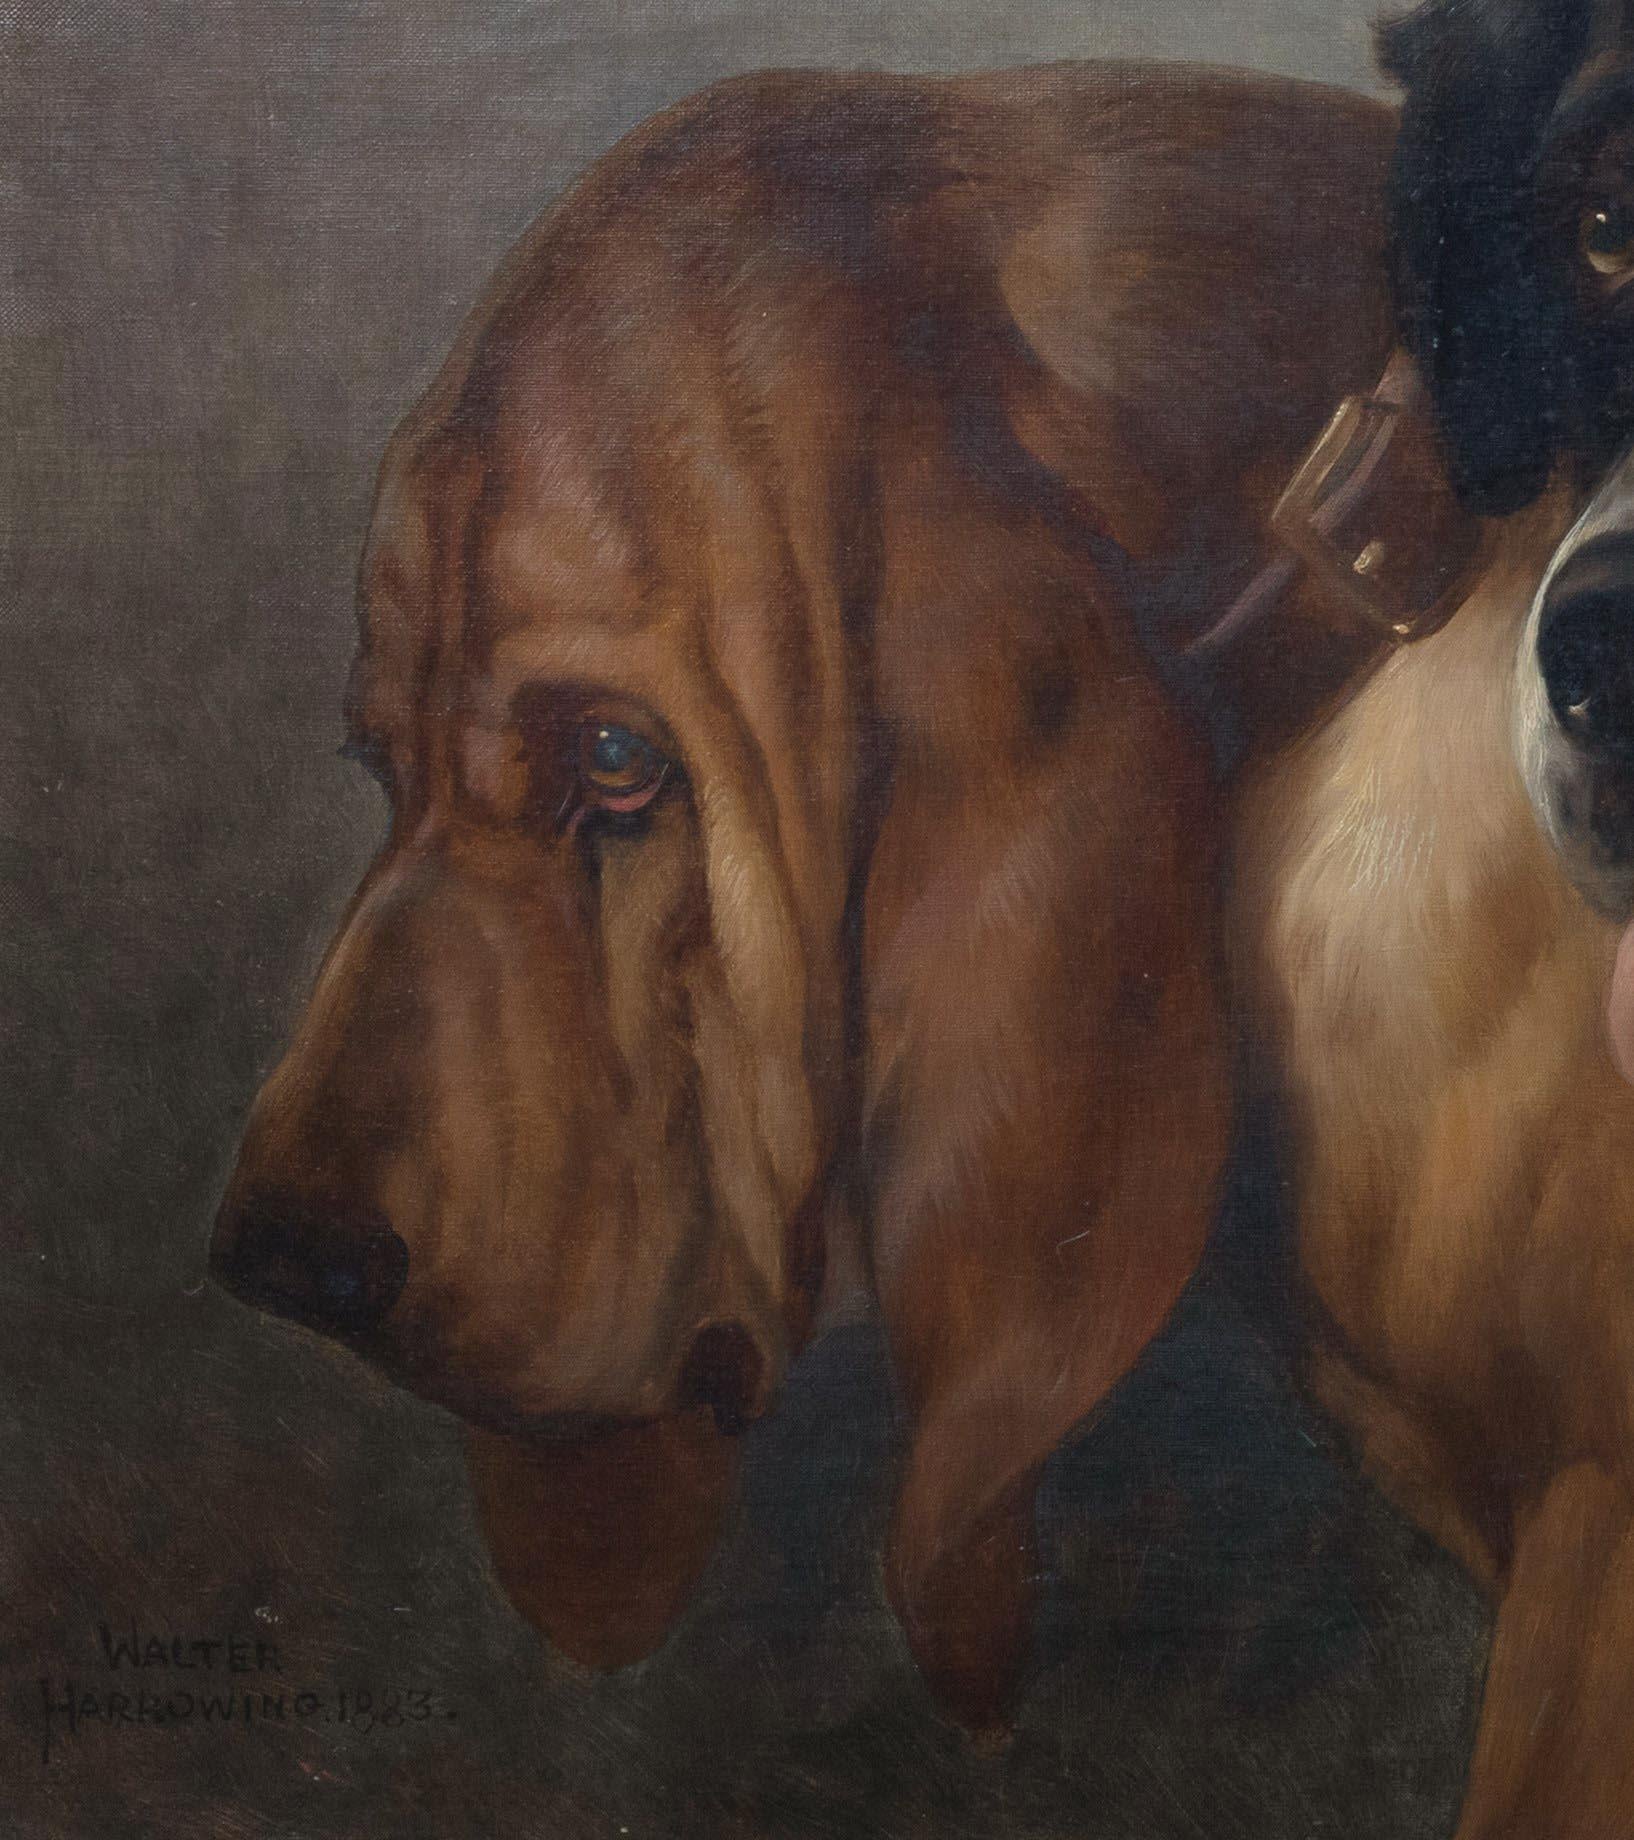 St Bernard & Bloodhound, 19th Century

by Walter Harrowing (1838-1913)

Large 19th Century English portrait of a St Bernard & a Bloodhound, oil on canvas by Walter Harrowing. Excellent quality and condition example of the famous dog painters work as